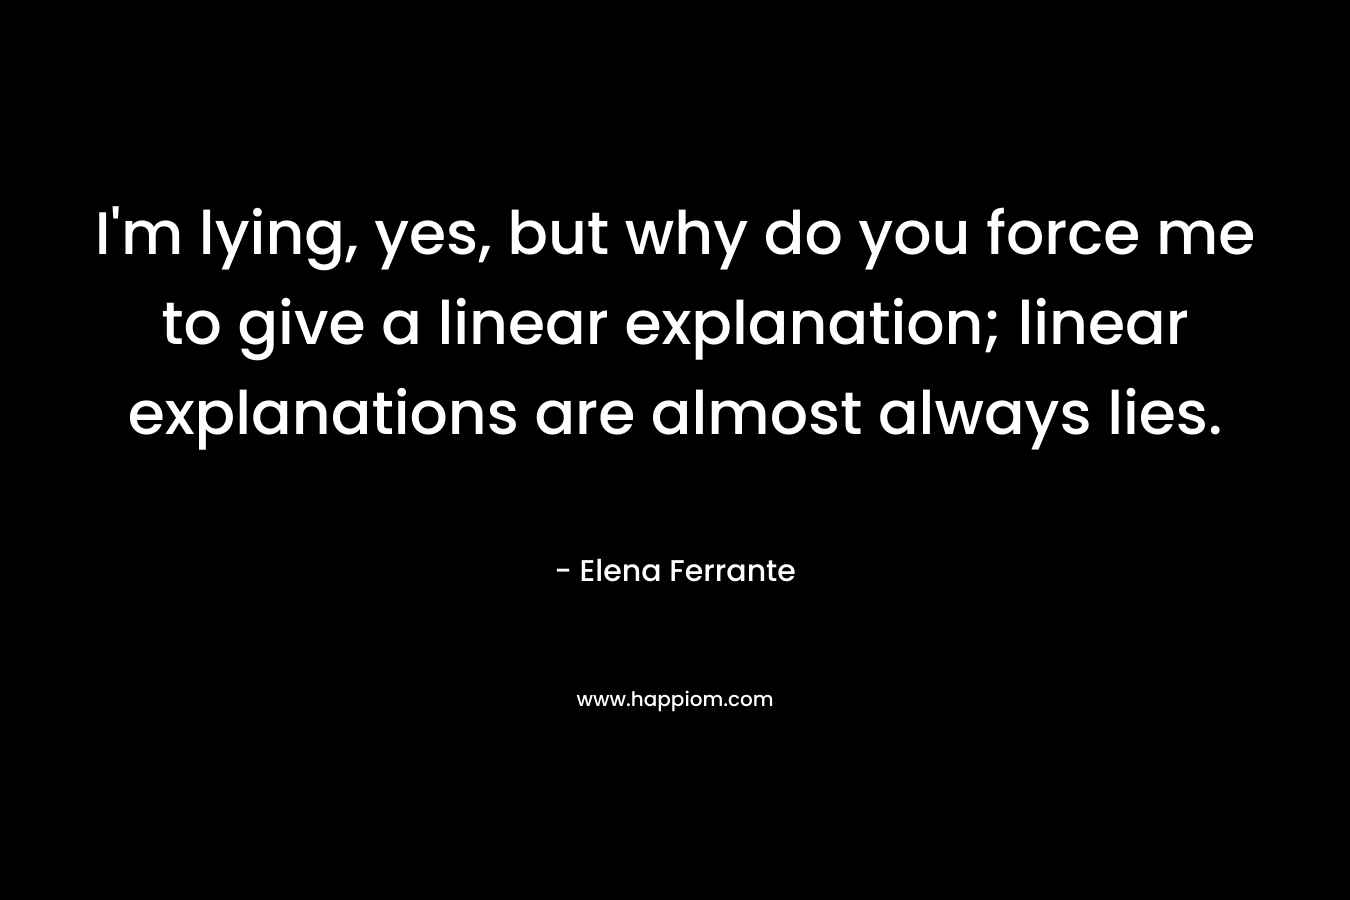 I'm lying, yes, but why do you force me to give a linear explanation; linear explanations are almost always lies.